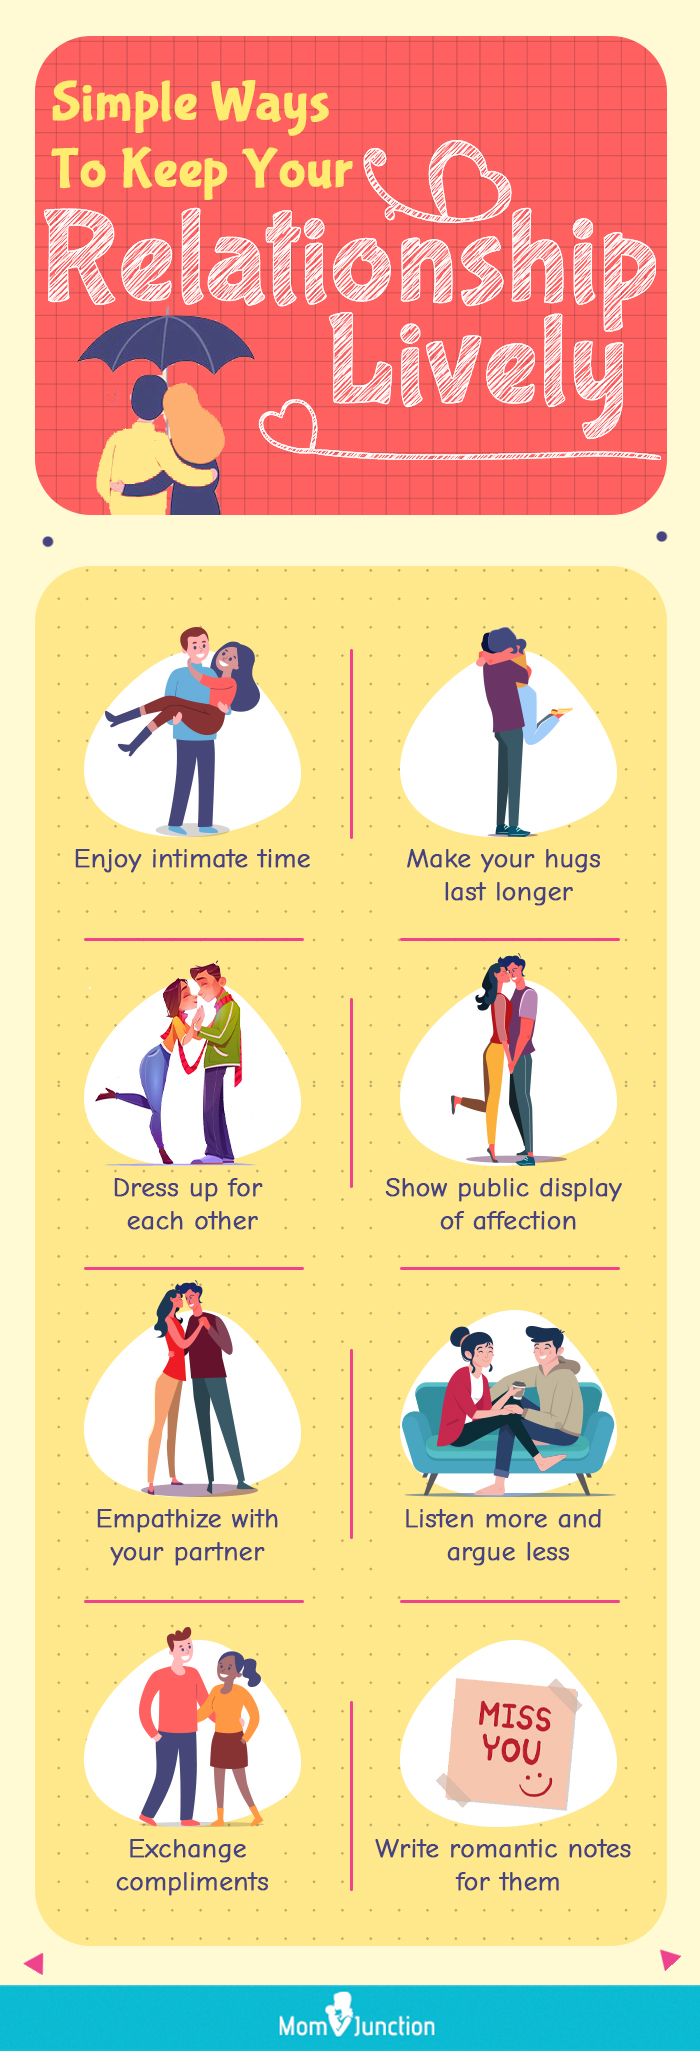 simple ways to keep your relationship lively (infographic)